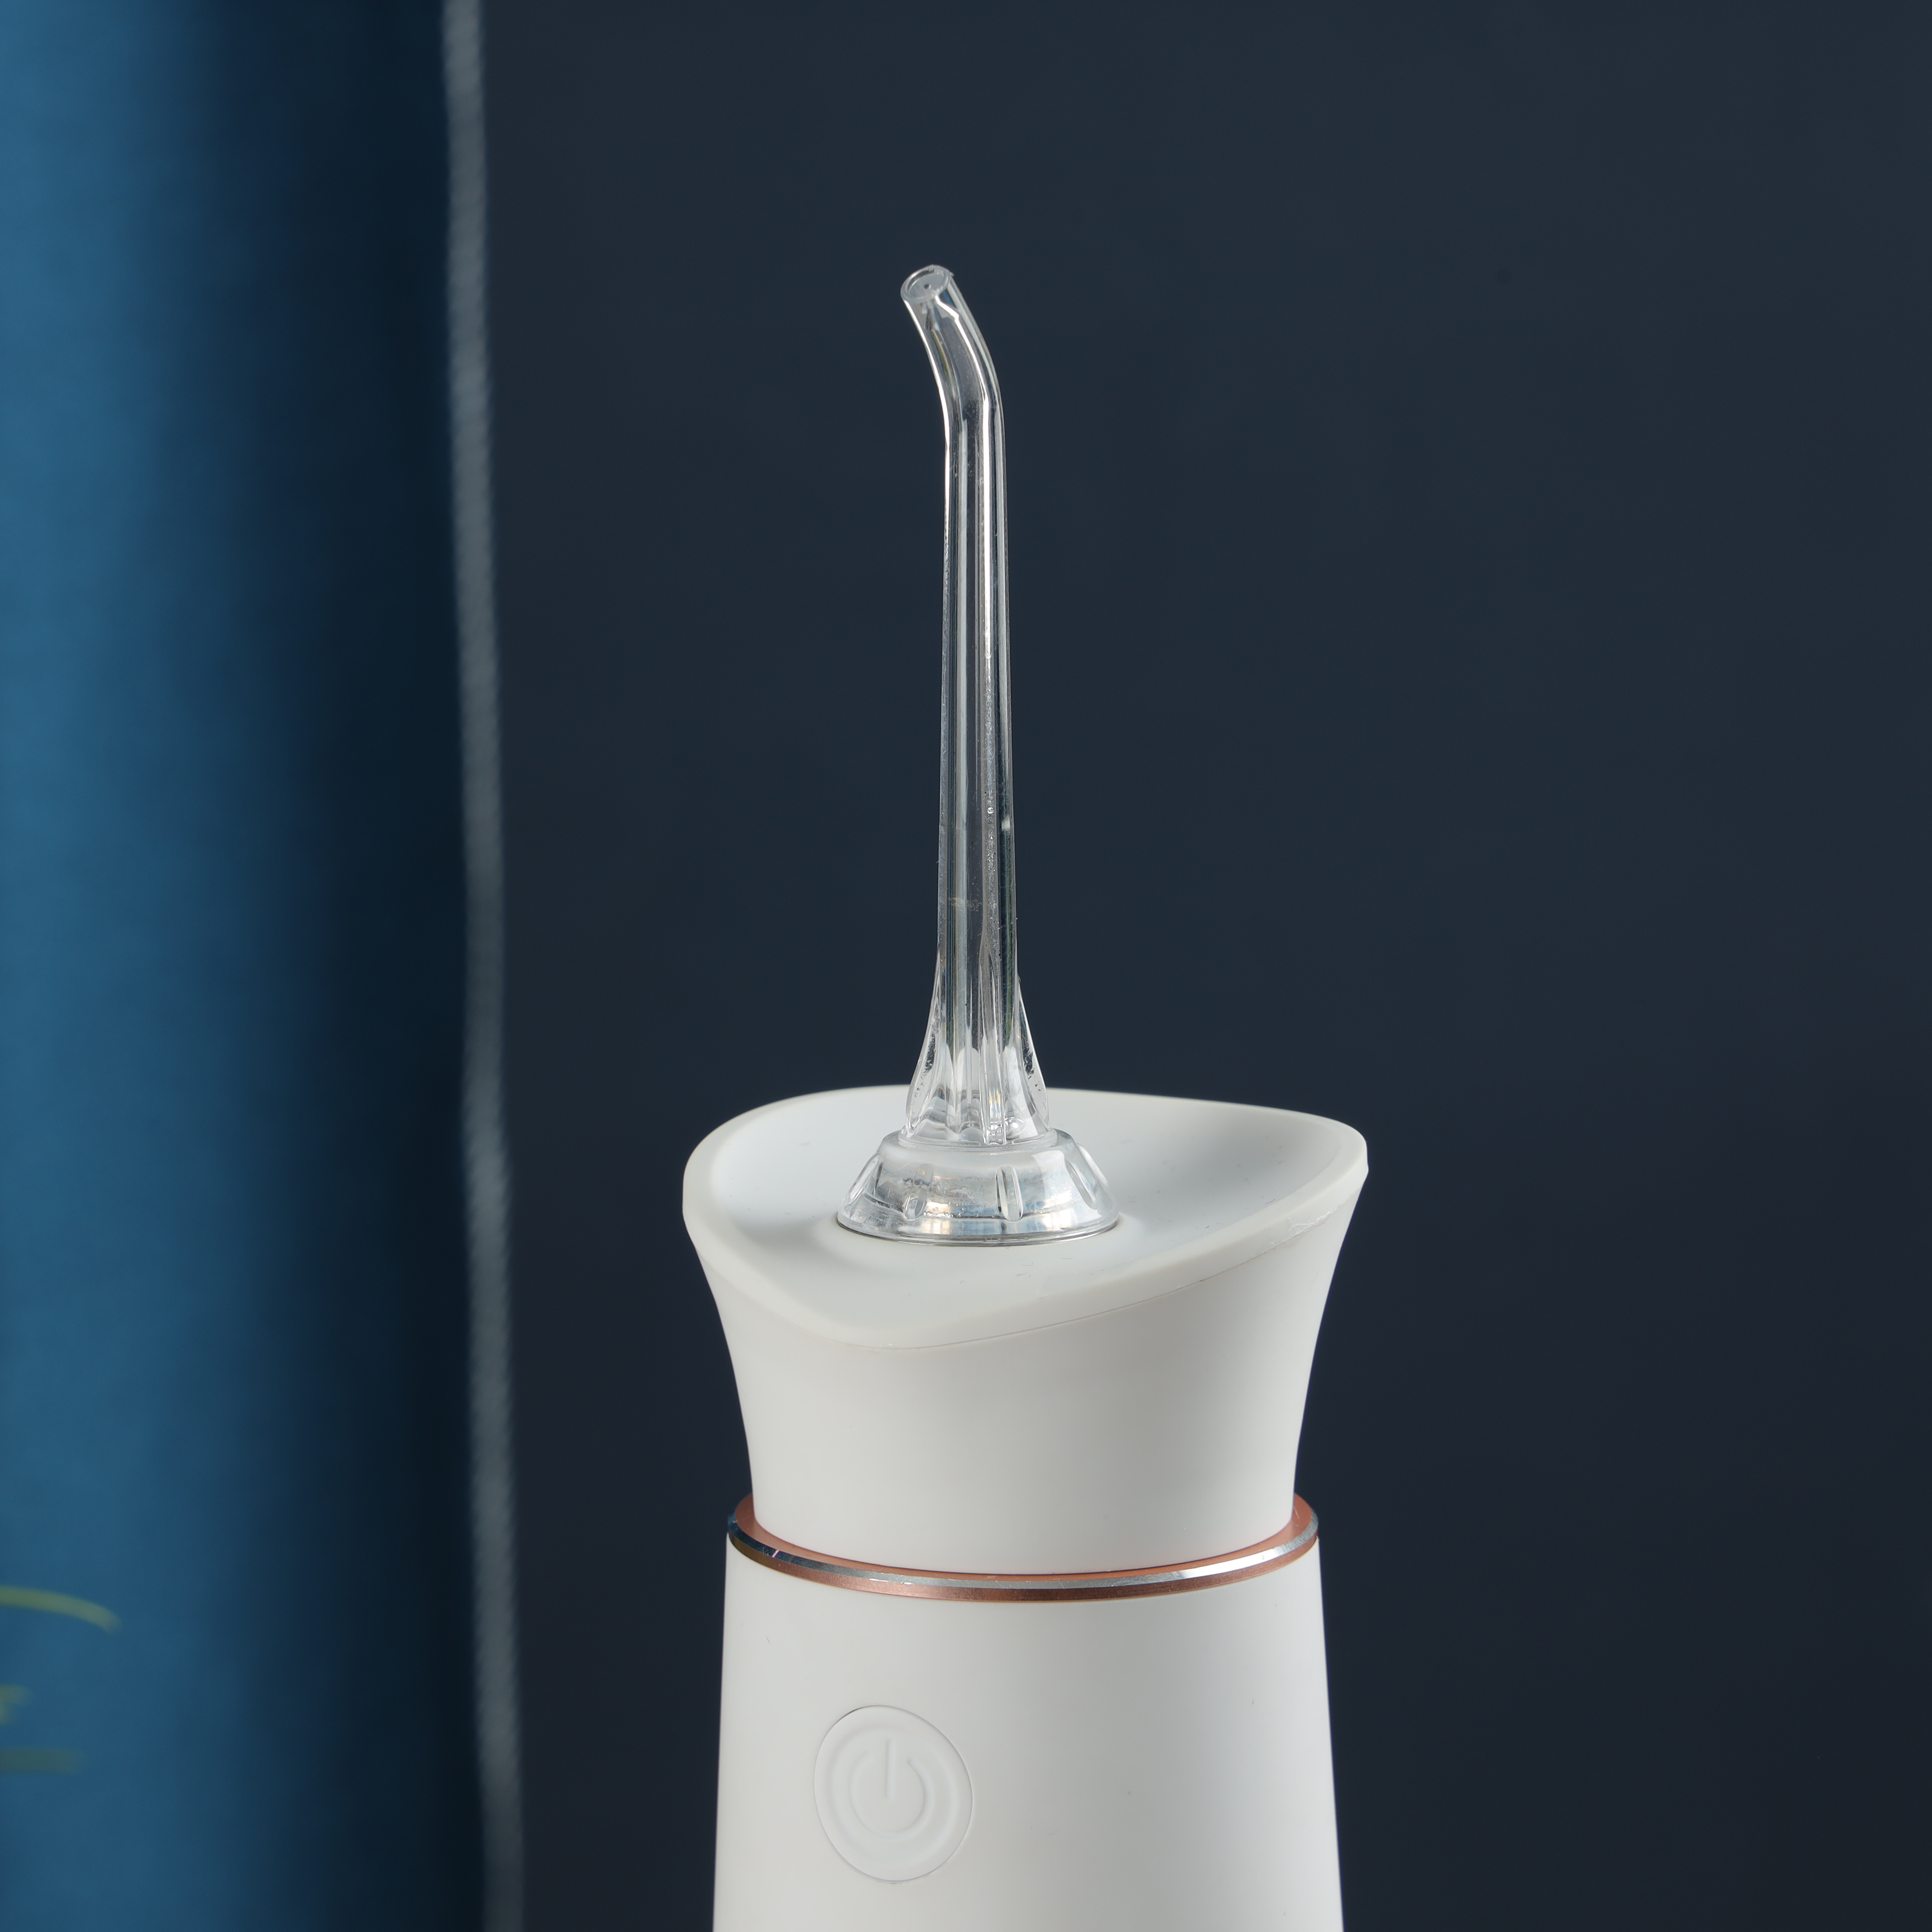 China Portable Water Flosser, Portable Water Flosser Factory, Portable Water Flosser Supplier